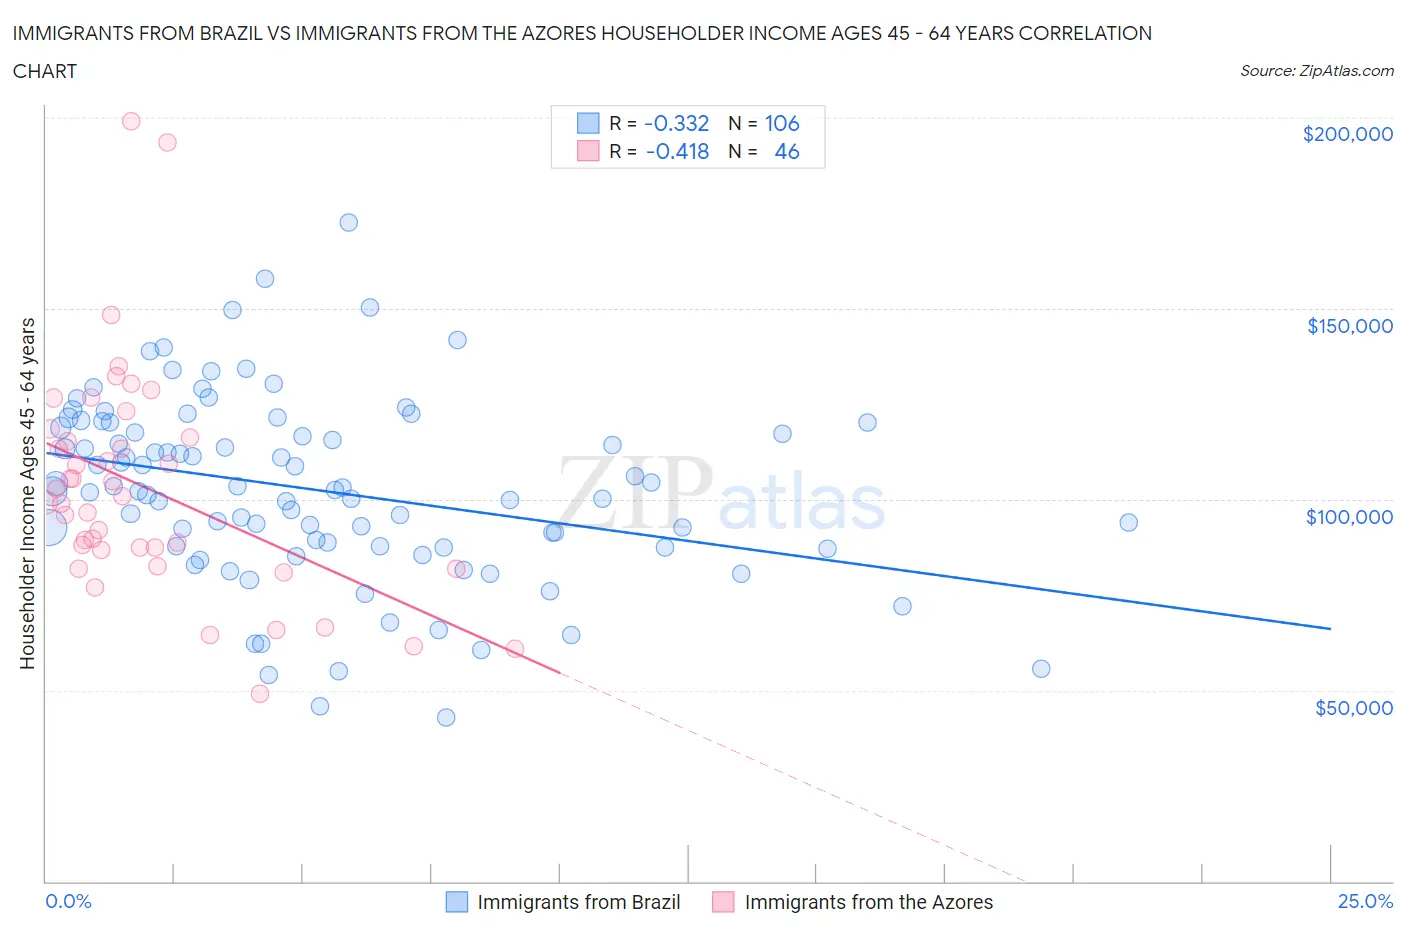 Immigrants from Brazil vs Immigrants from the Azores Householder Income Ages 45 - 64 years